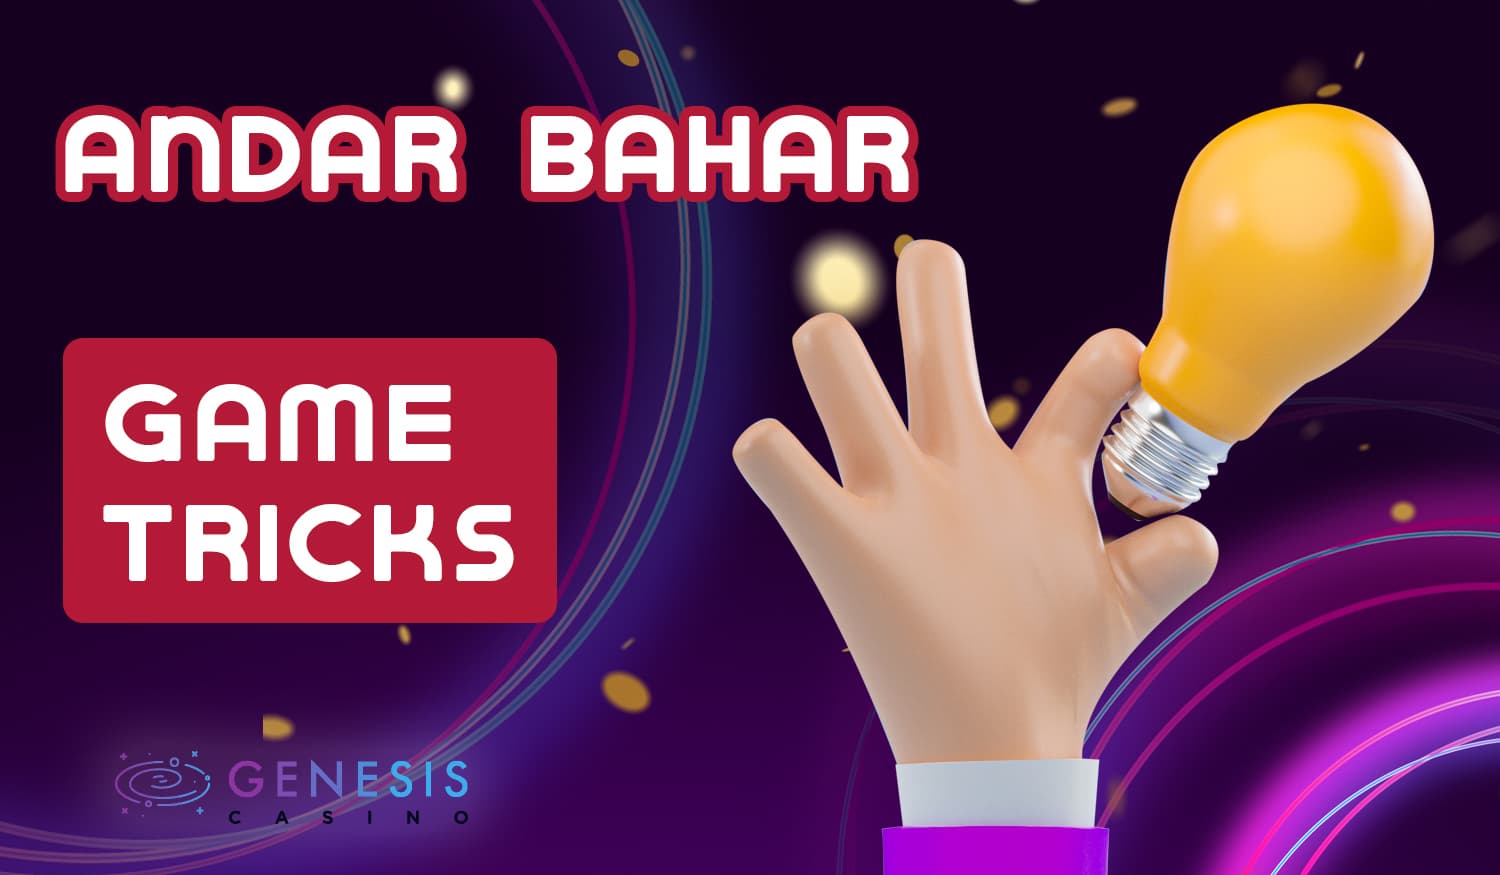 List of useful tips for beginner Andar Bahar players from India at Genesis